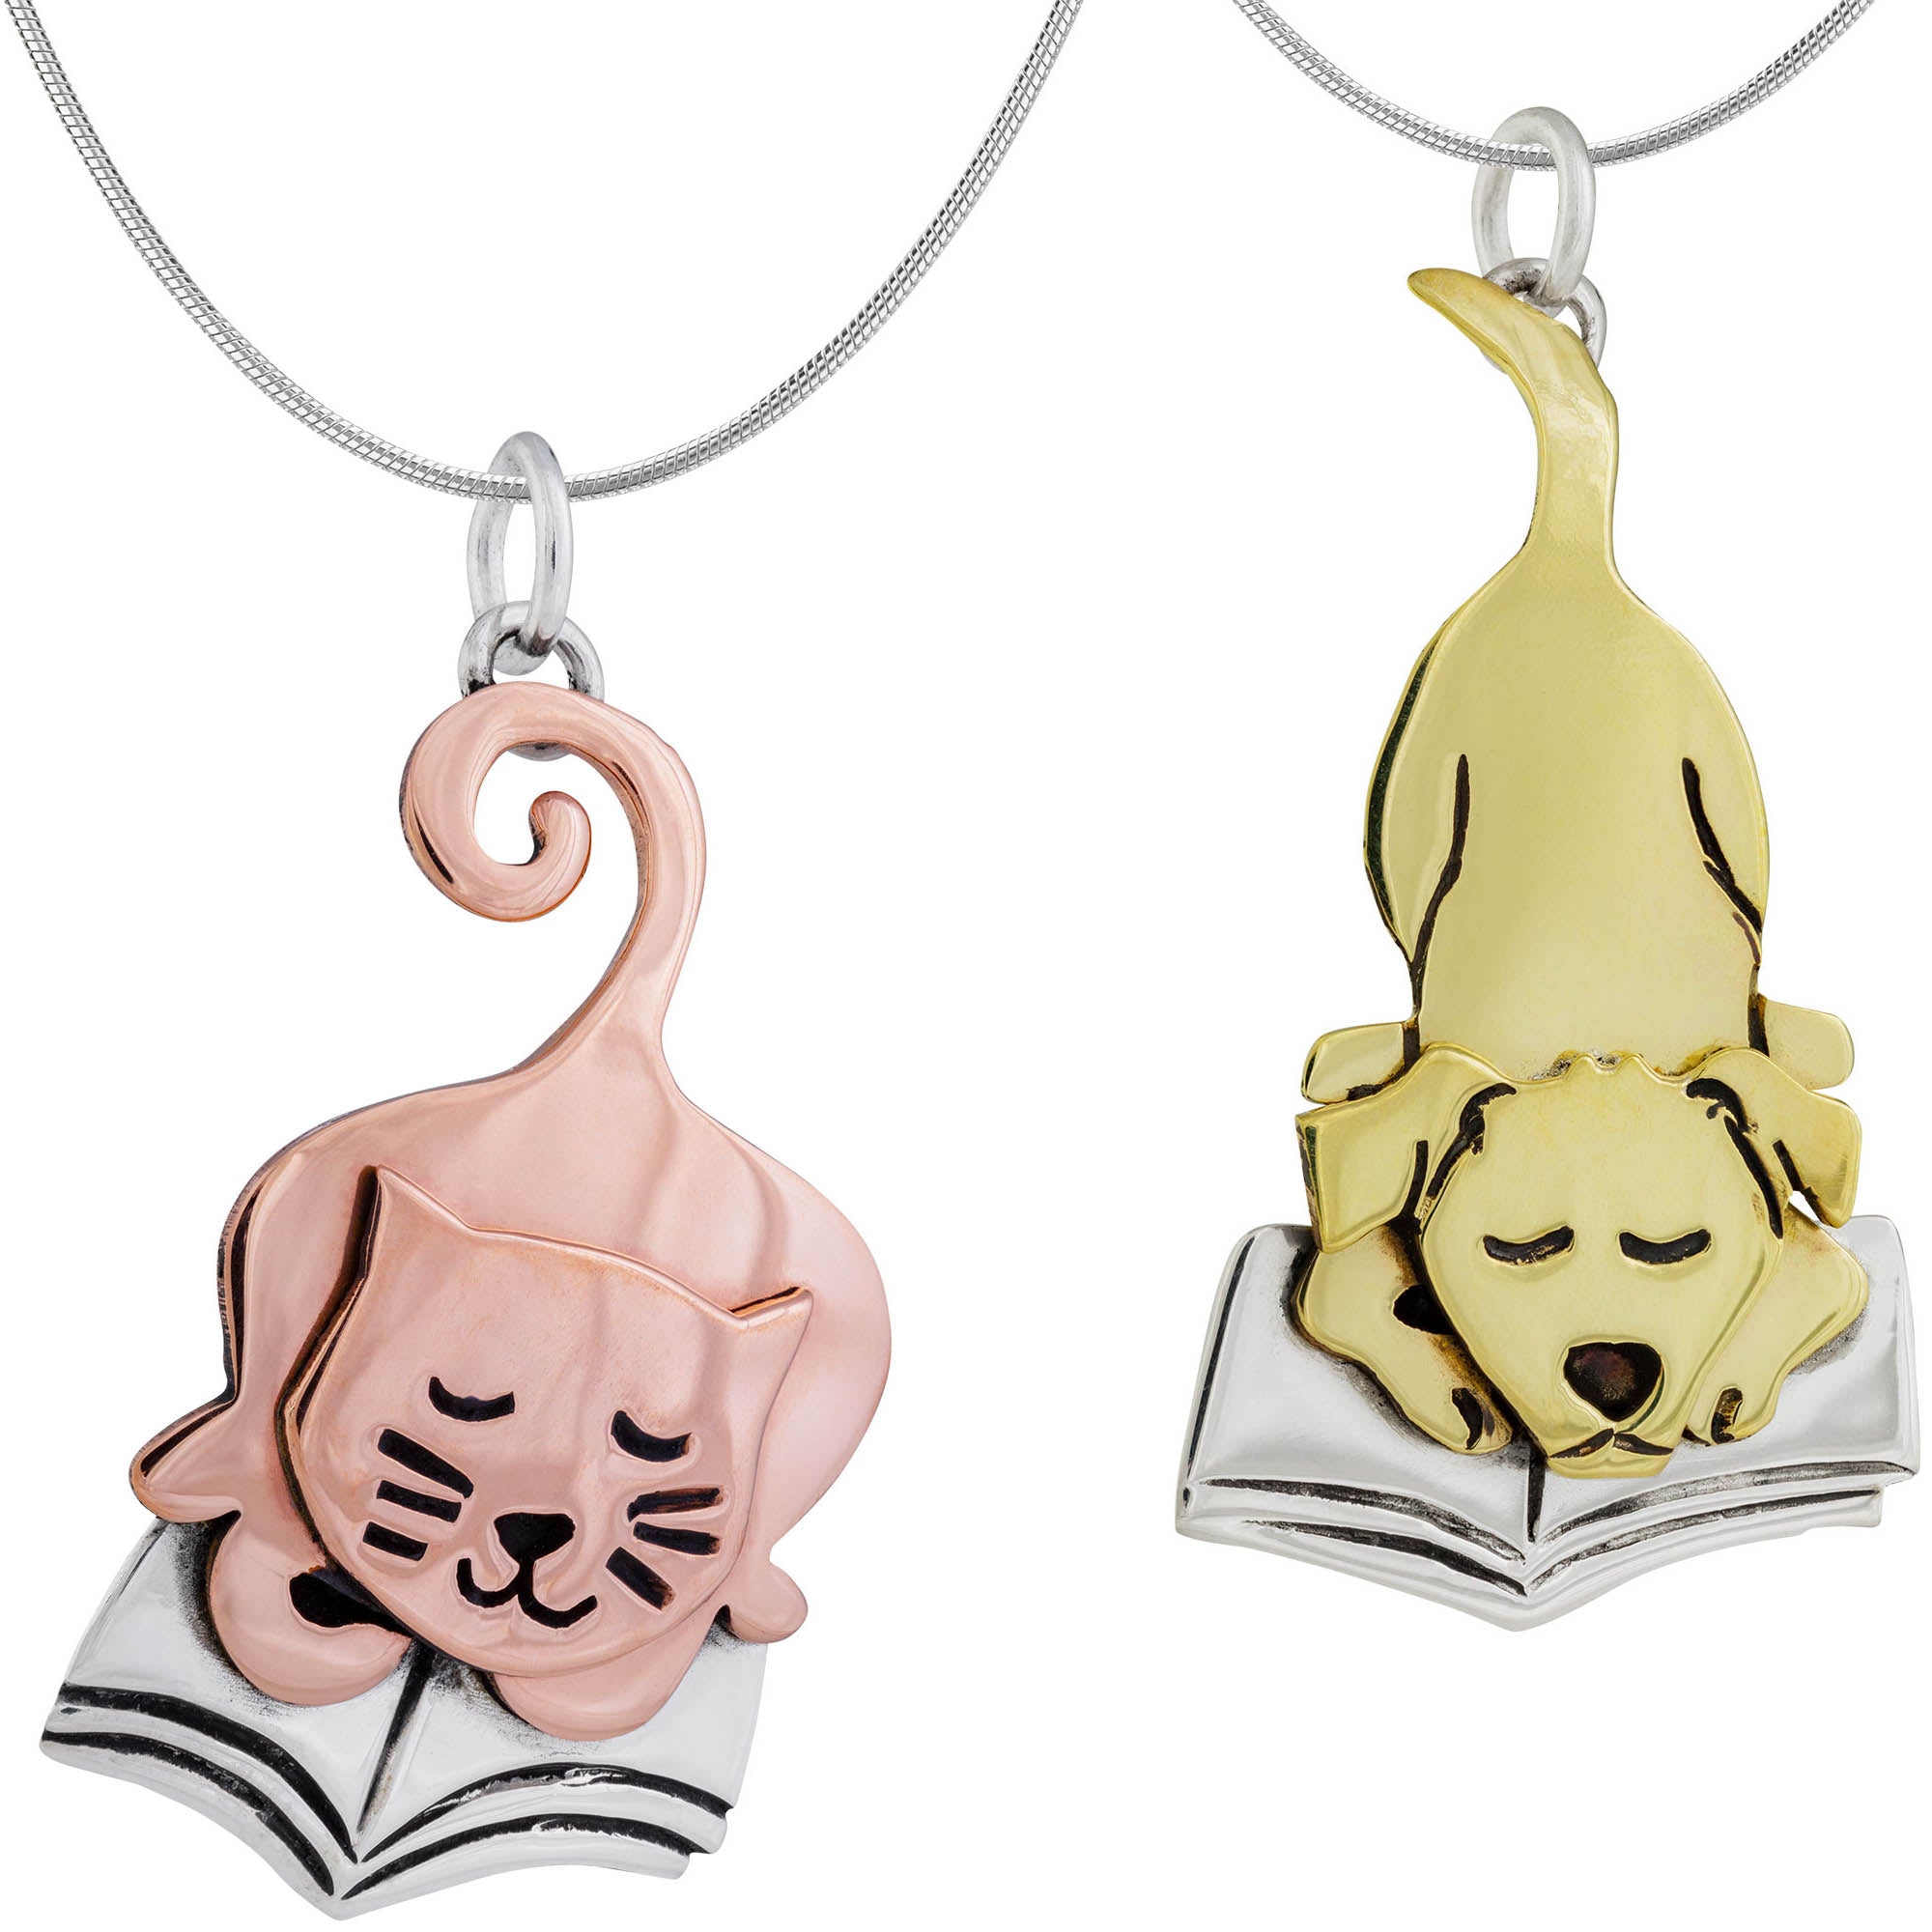 Pet Lover Book Club Sterling Necklace - Dog - With Diamond Cut Chain